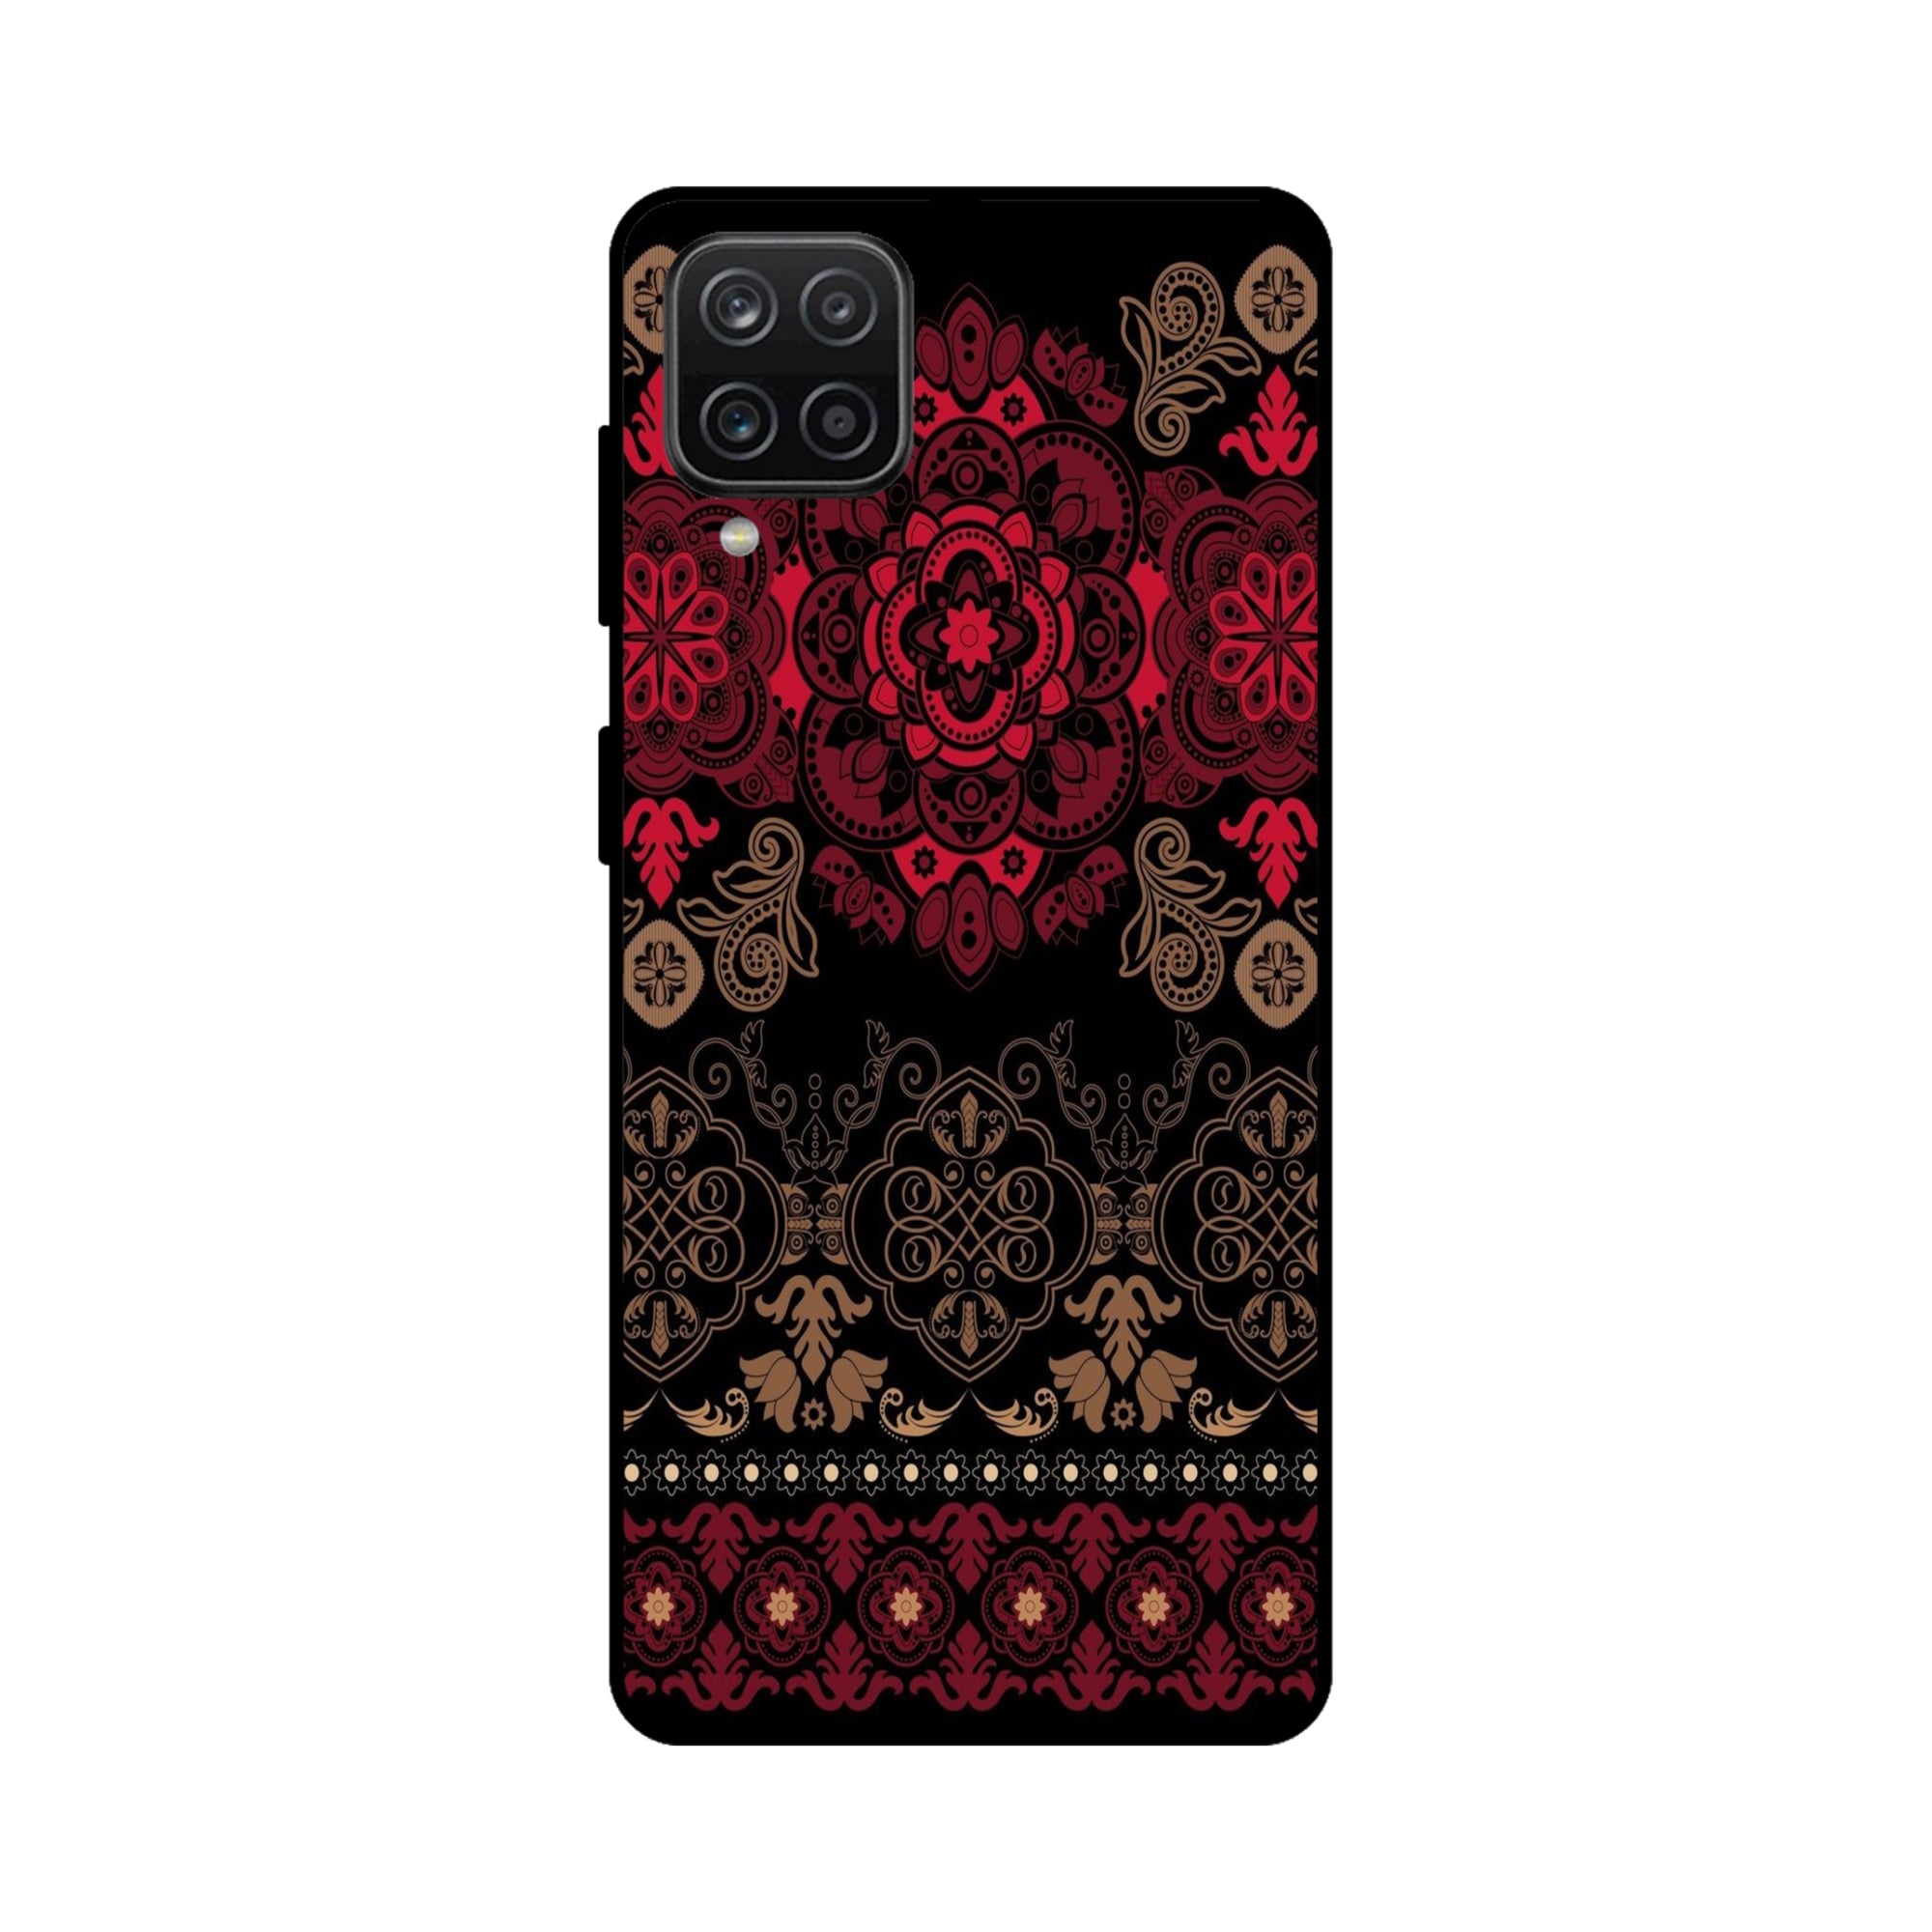 Buy Christian Mandalas Metal-Silicon Back Mobile Phone Case/Cover For Samsung Galaxy M32 Online